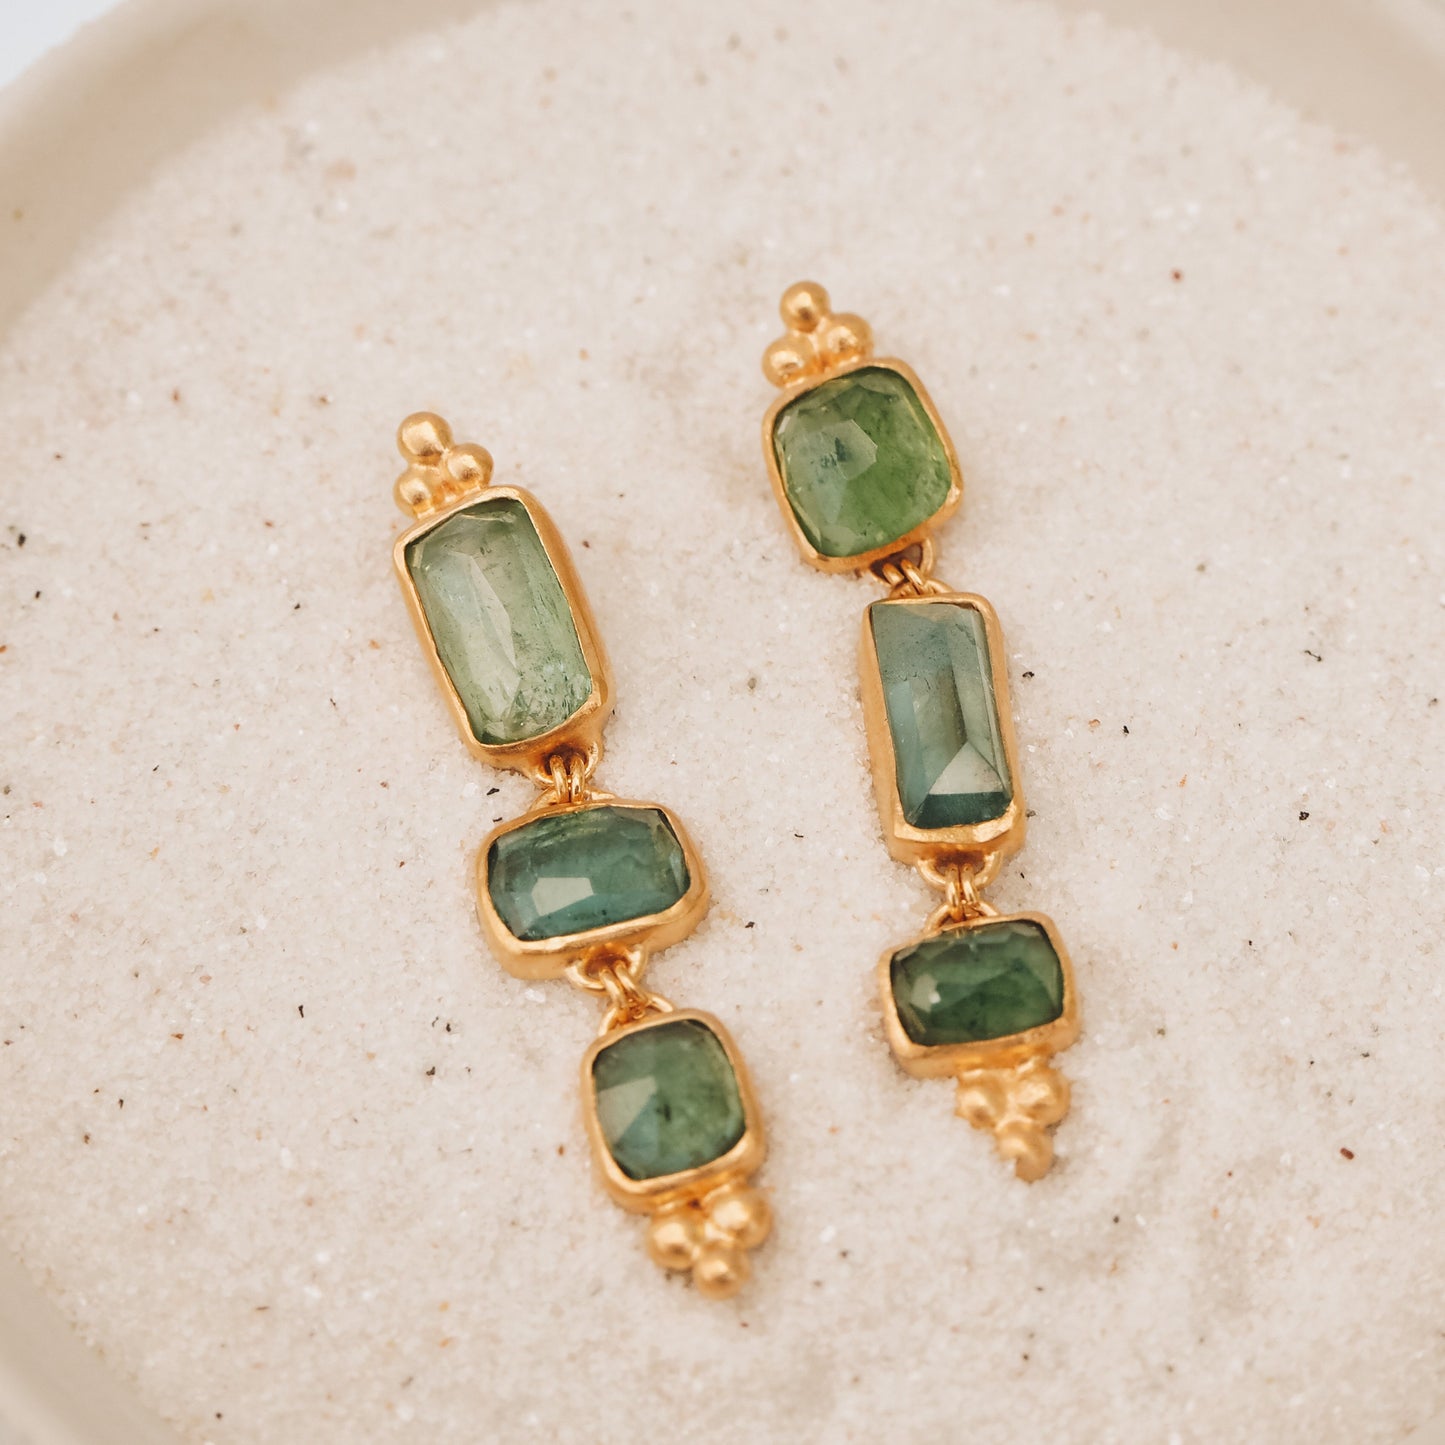 Unique gold earrings featuring one-of-a-kind square rose cut tourmaline gemstone drops in ocean blue and green, accompanied by intricate granulation accents.